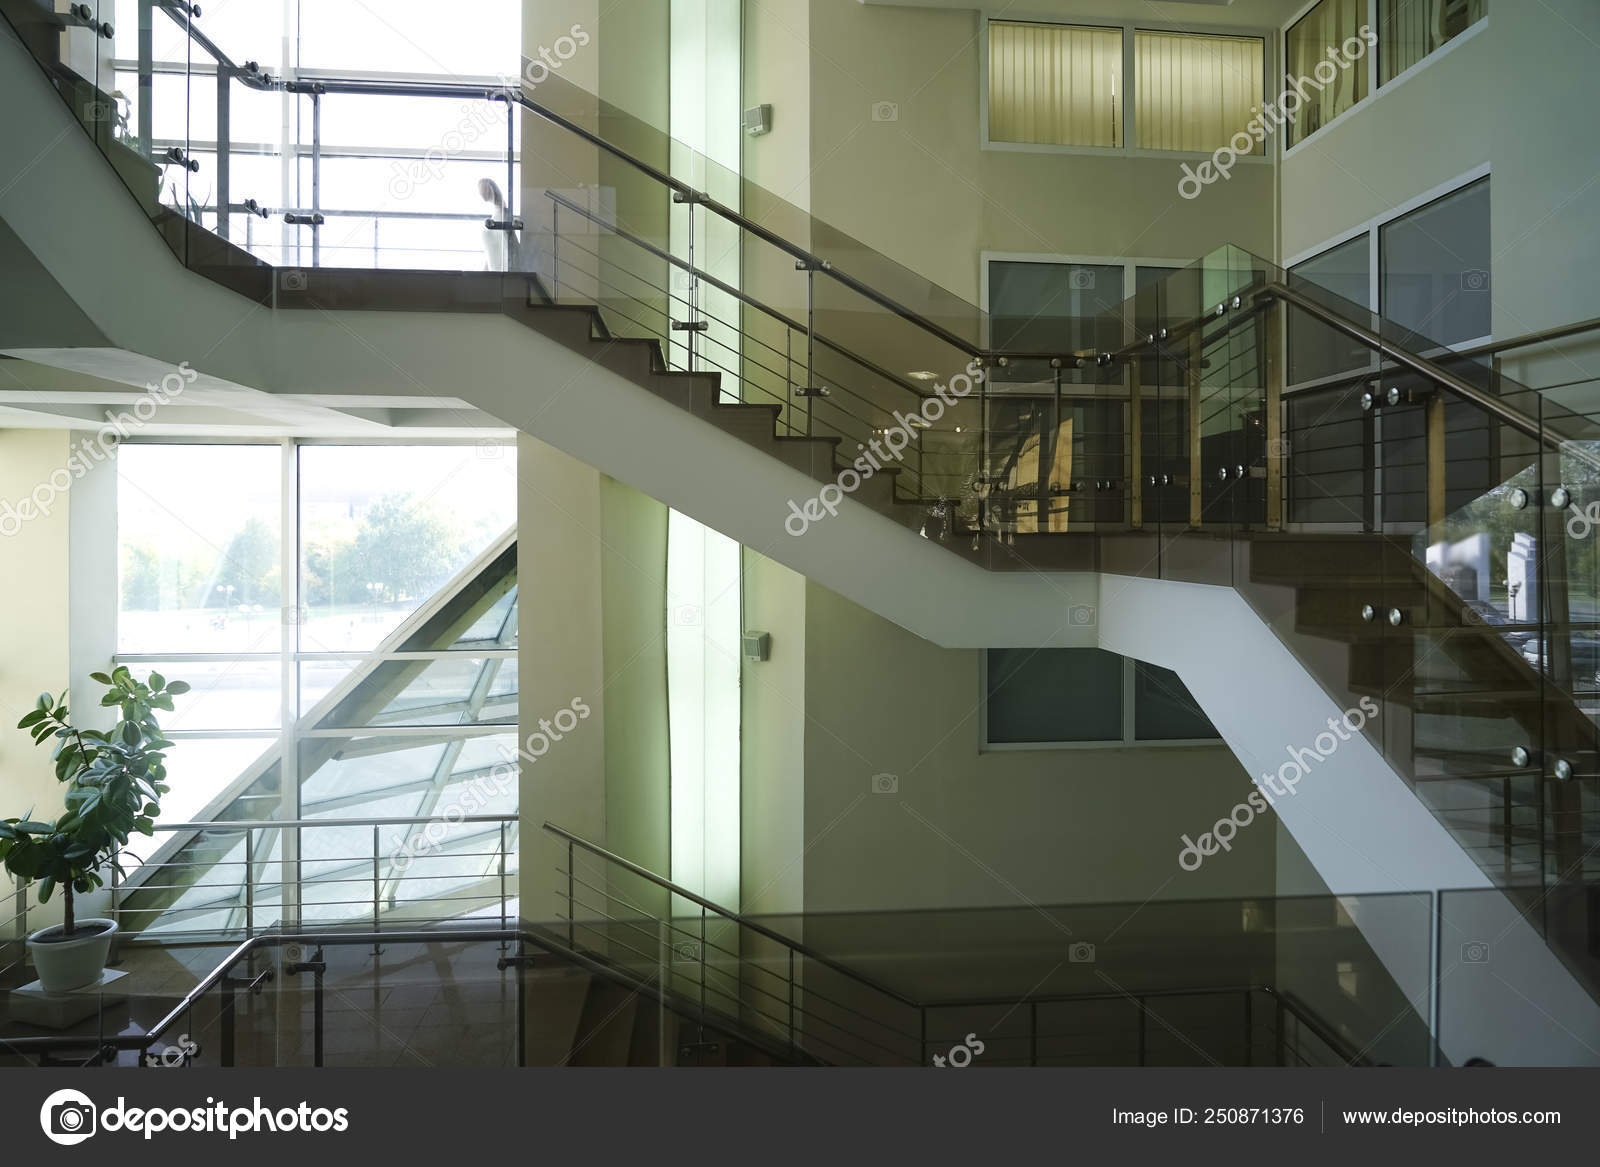 Stone Stairs Modern Interior Glass Railings Low Angle View